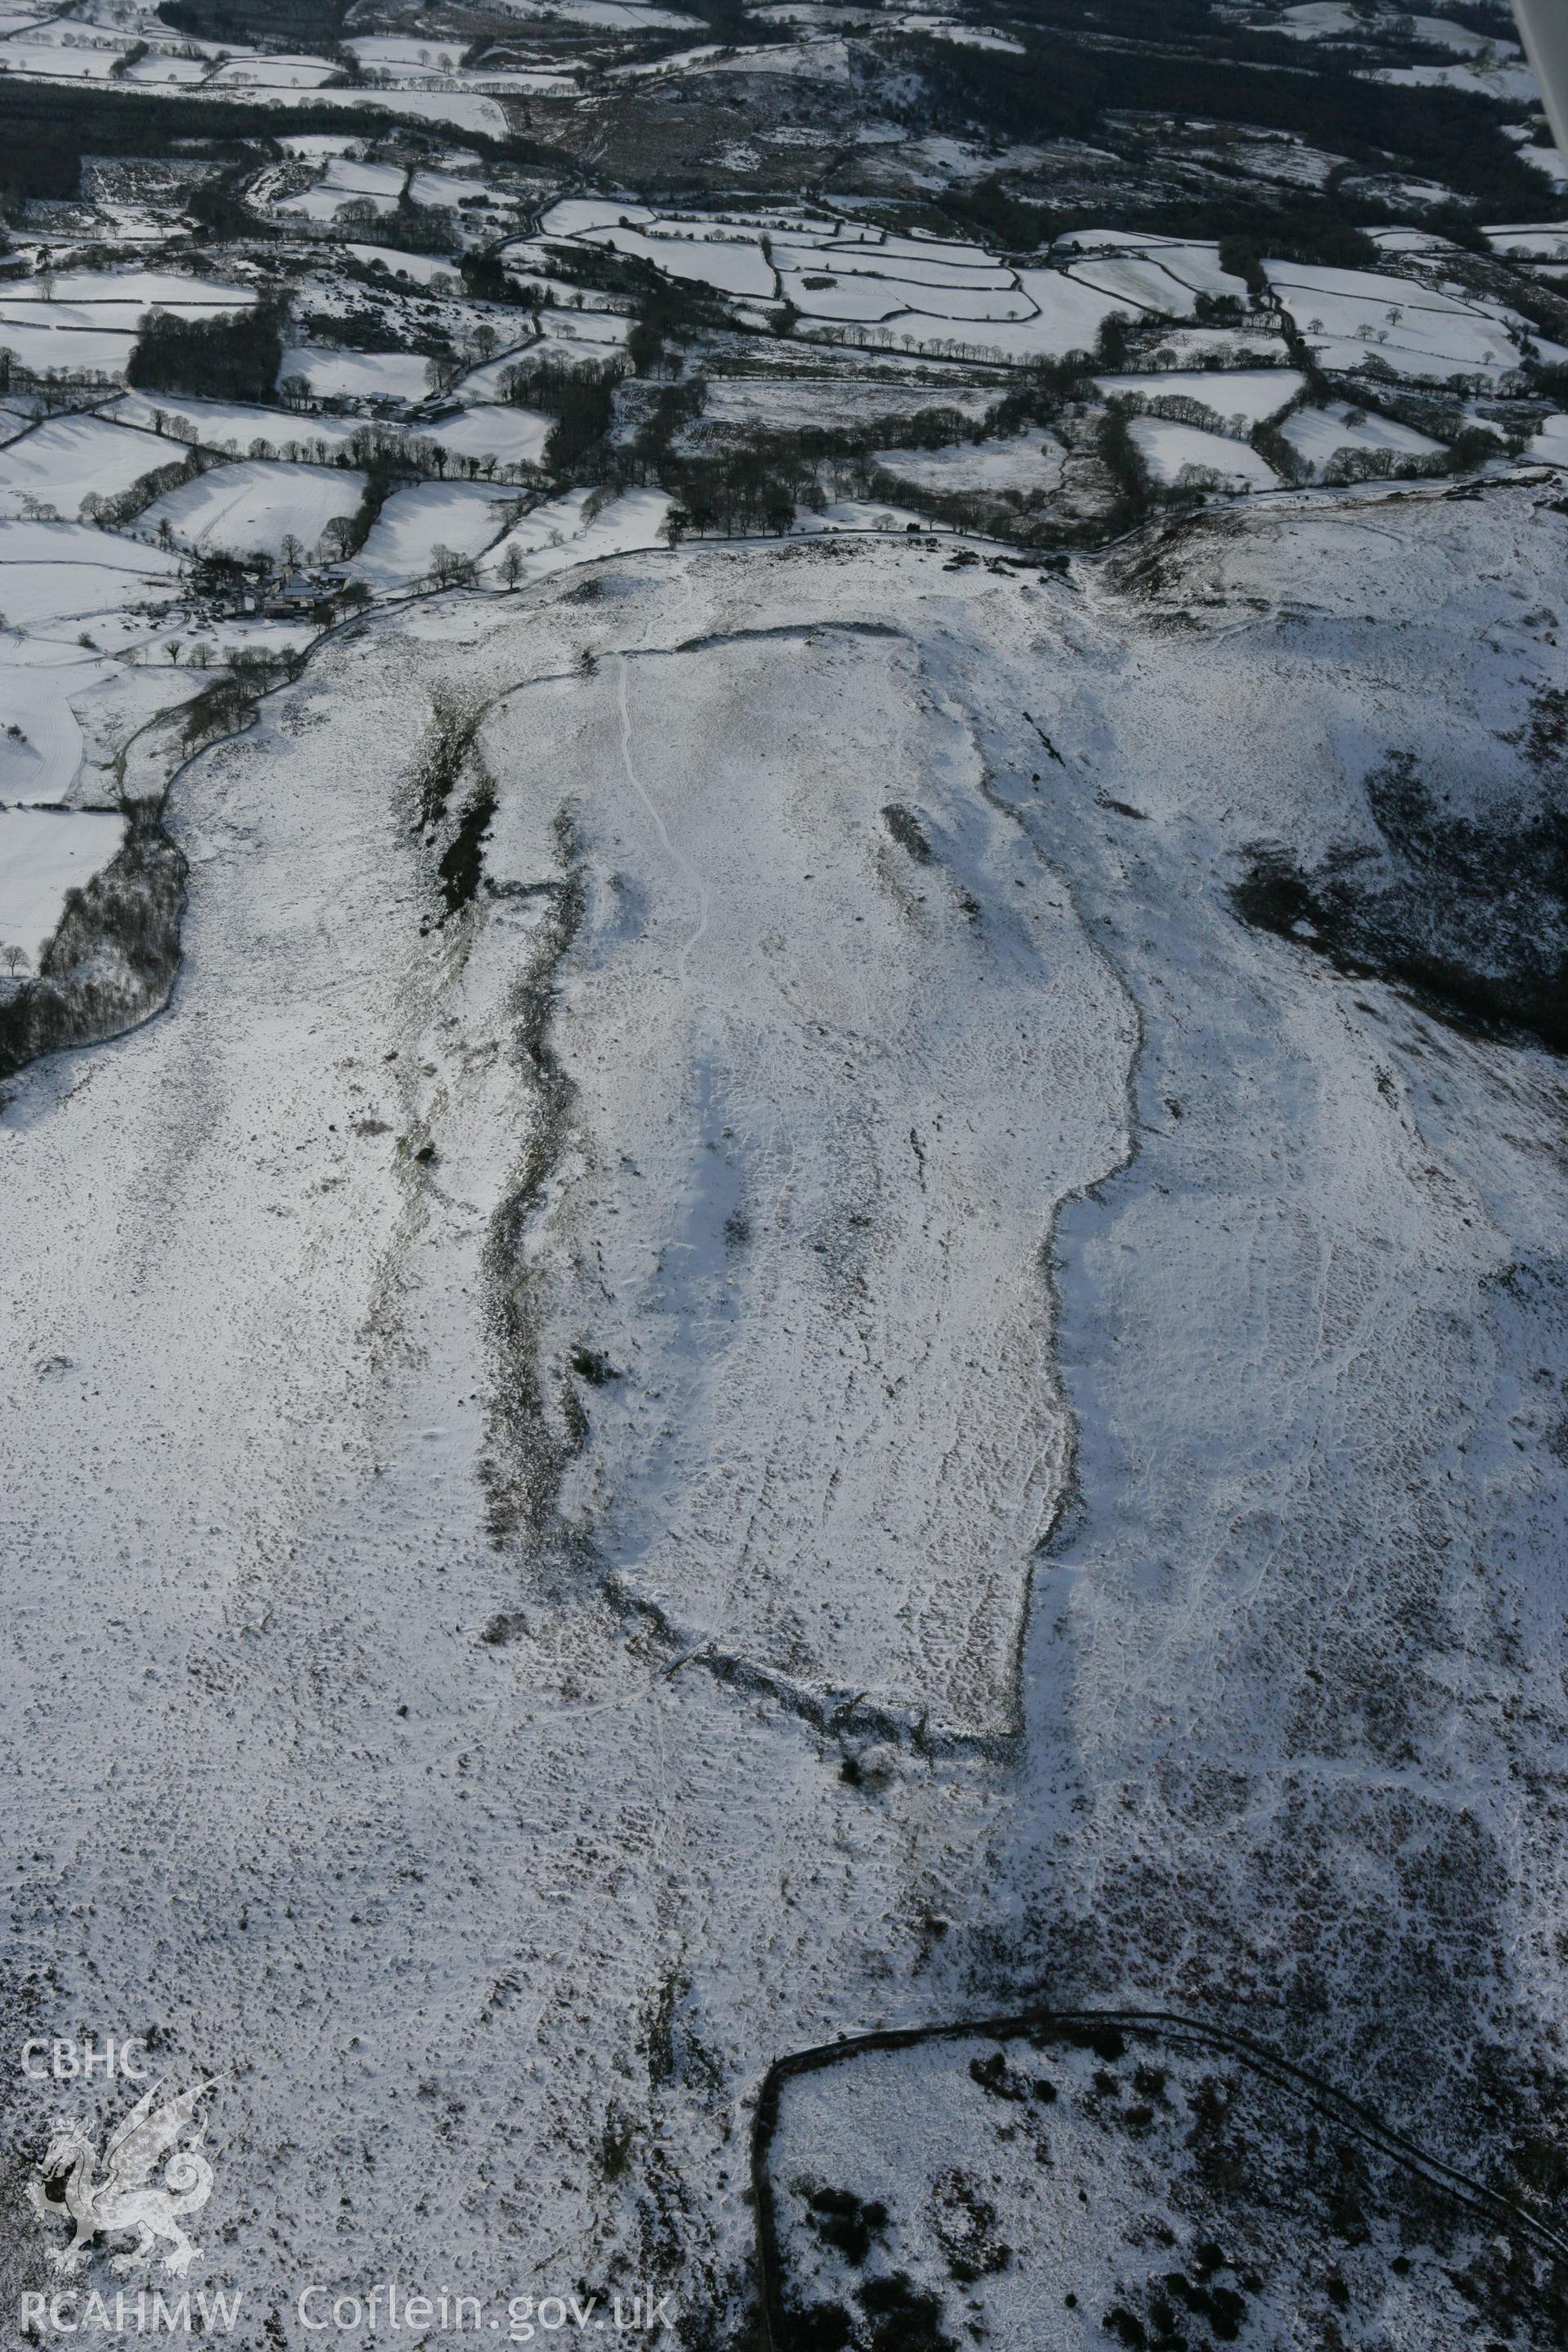 RCAHMW colour oblique photograph of Y Gaer Fawr hillfort on Carn Goch, under snow. Taken by Toby Driver on 06/02/2009.